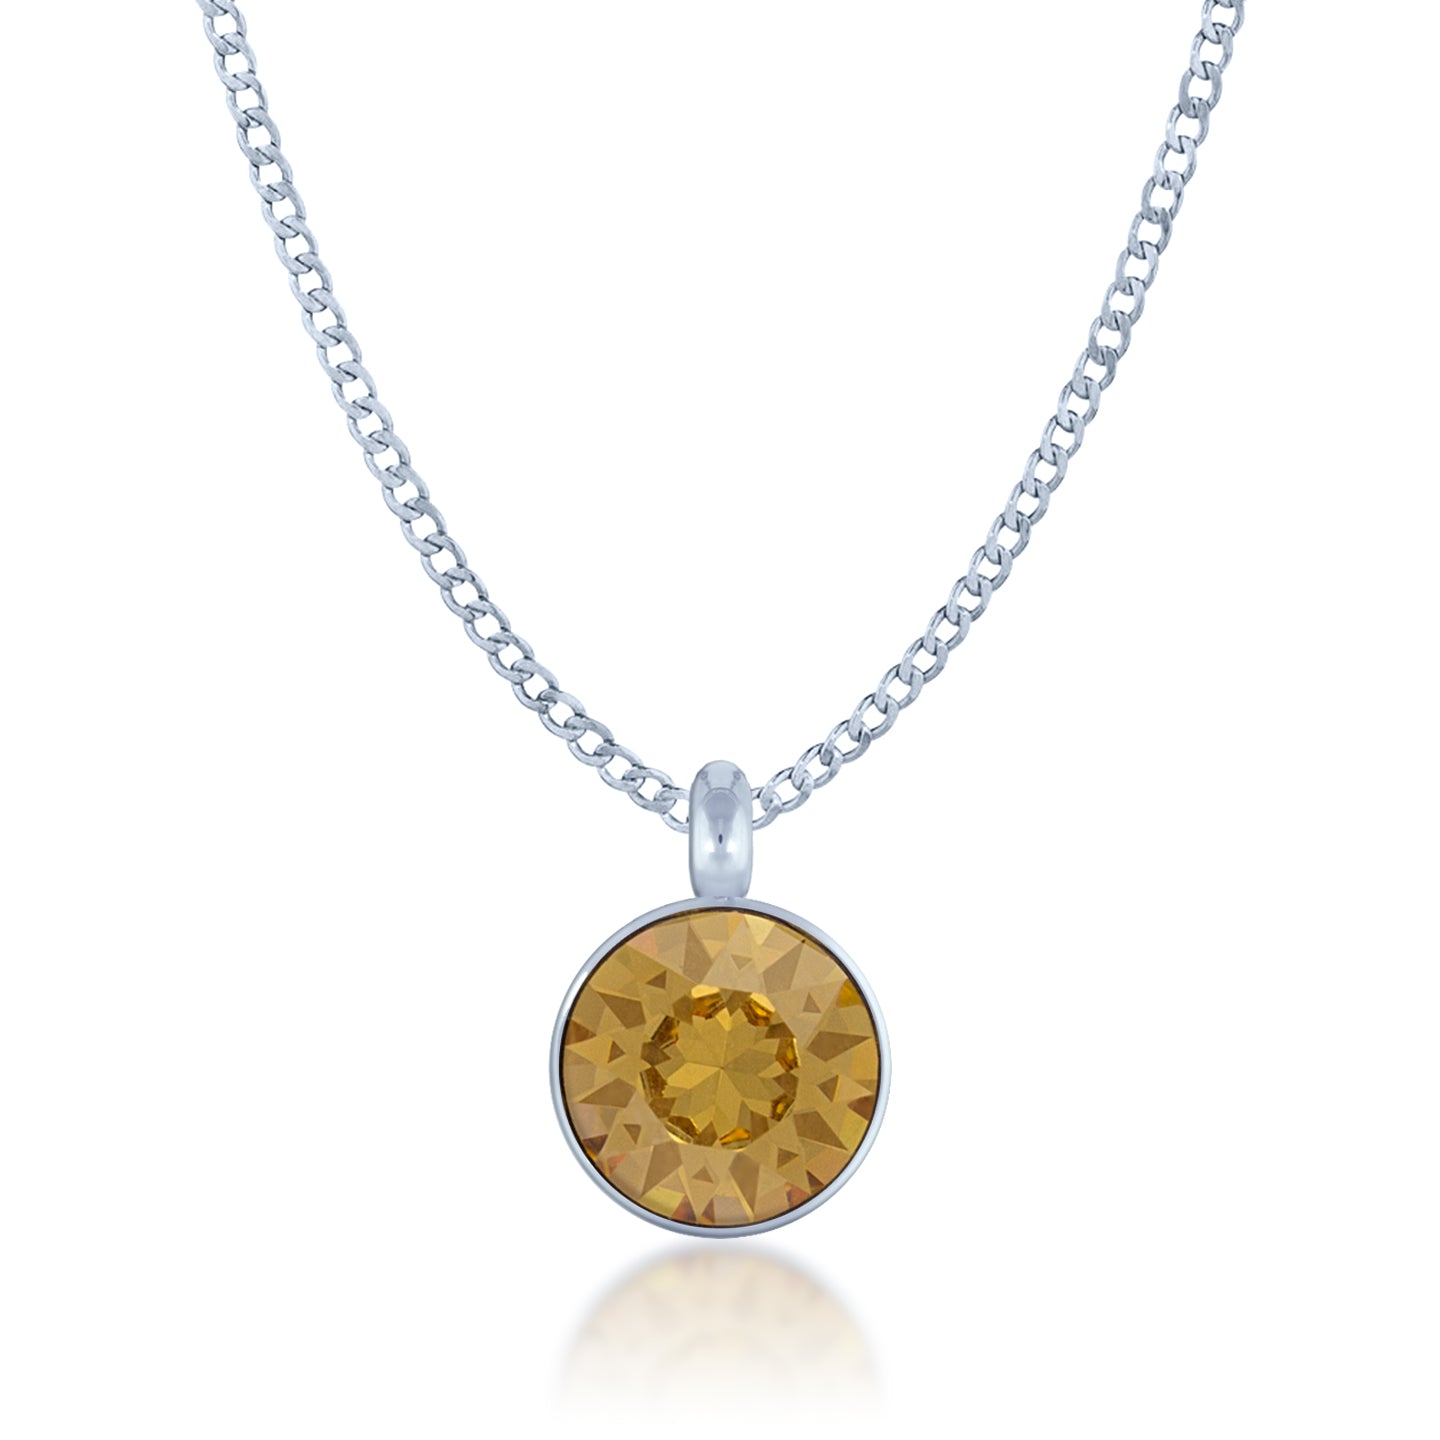 Bella Pendant Necklace with Yellow Brown Light Topaz Round Crystals from Swarovski Silver Toned Rhodium Plated - Ed Heart